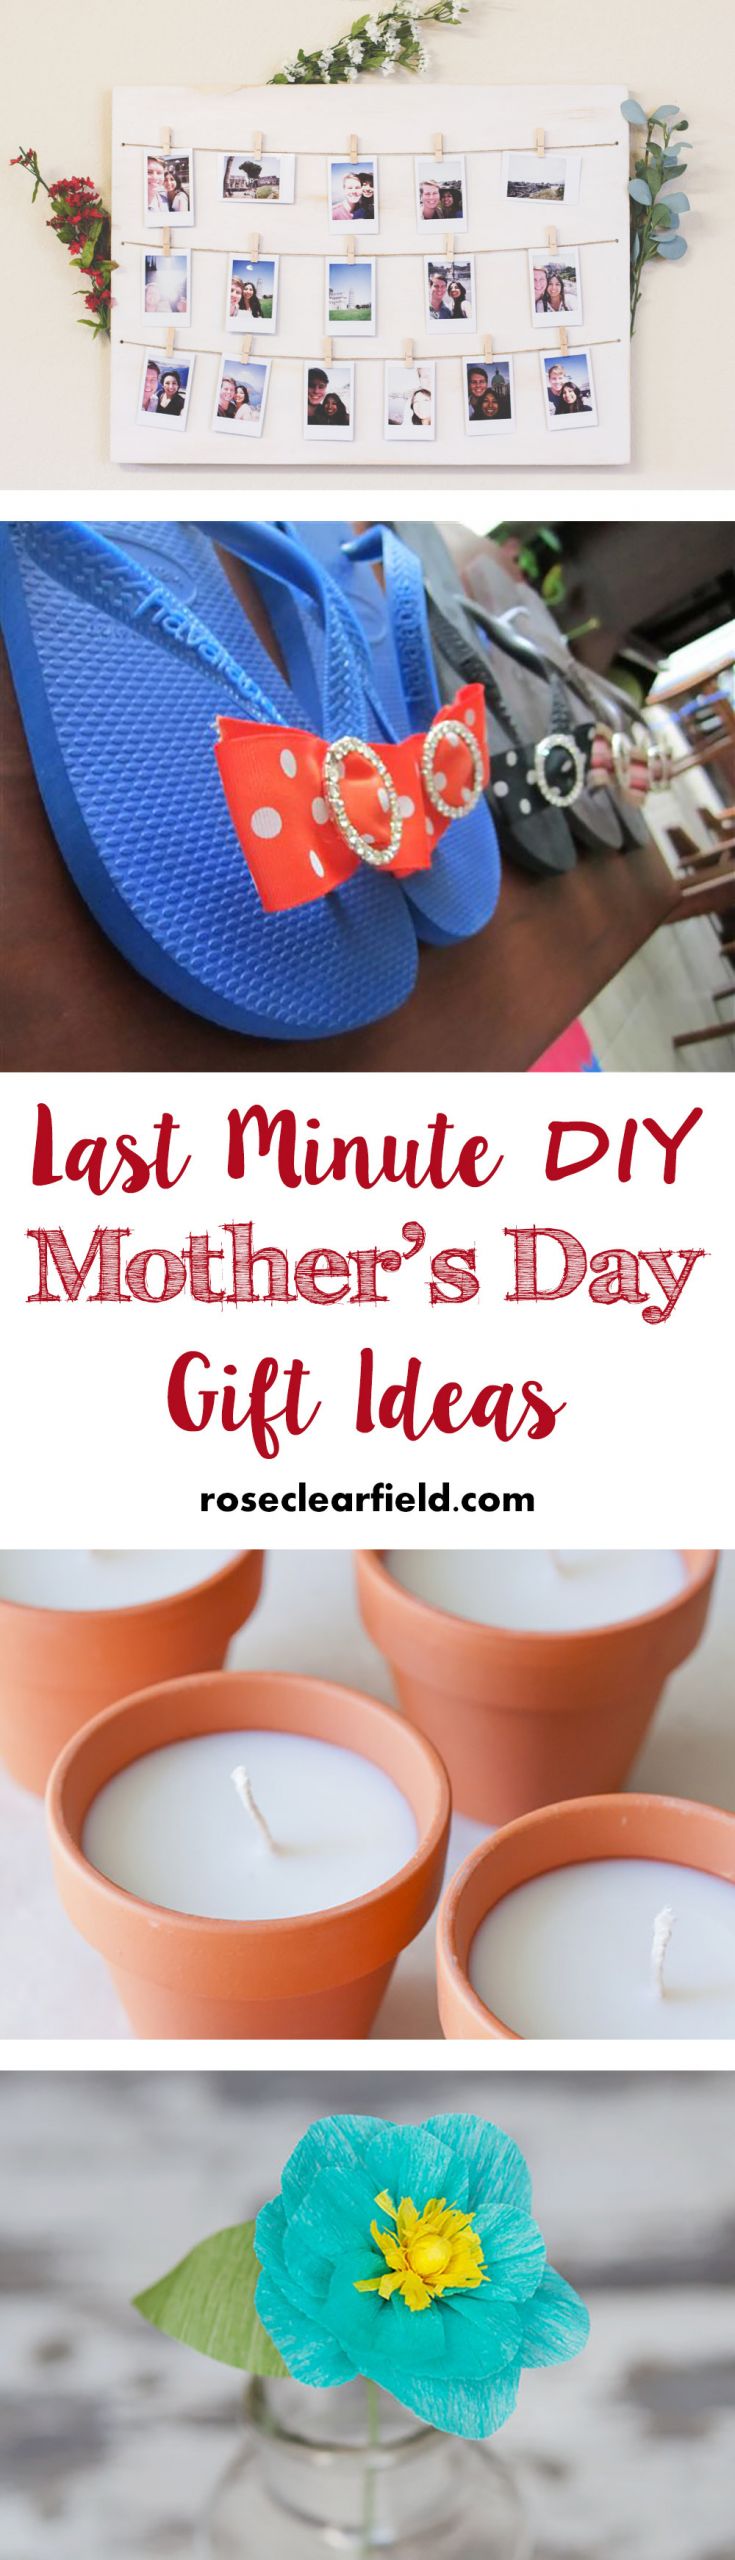 Last Minute DIY Gift Ideas
 Last Minute DIY Mother s Day Gift Ideas • Rose Clearfield